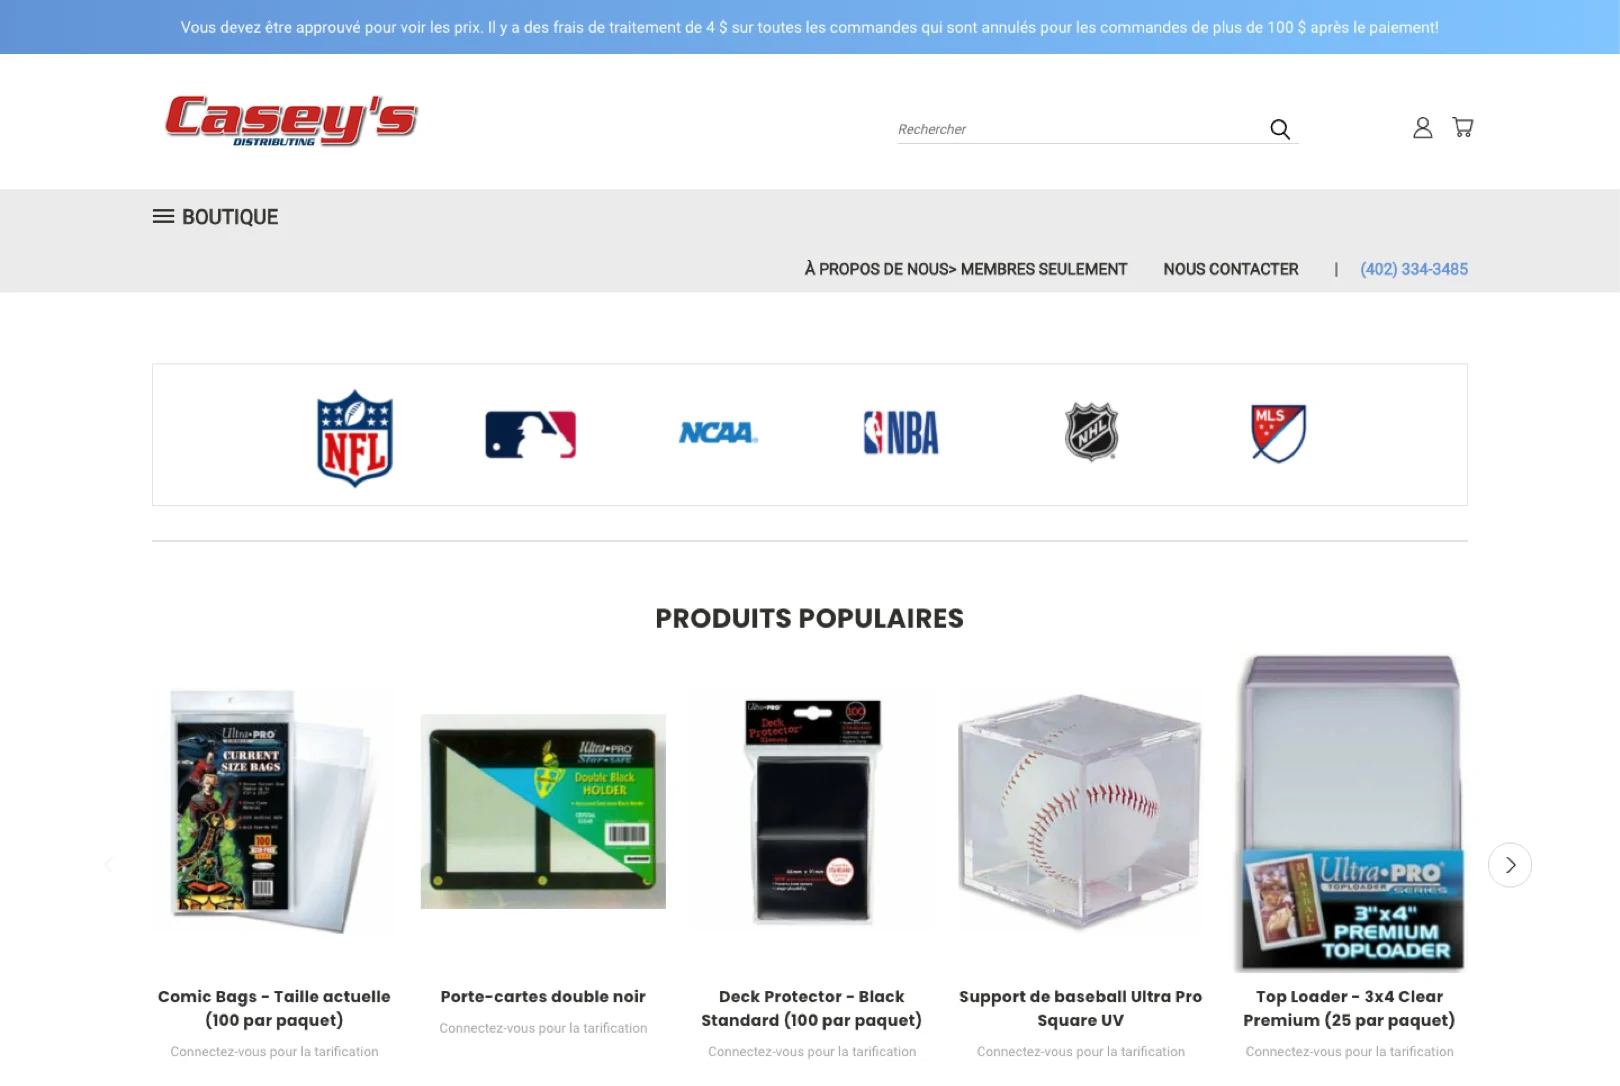 https://www-cdn.bigcommerce.com/assets/international-french-storefront-featured-products-casey-distribution.png